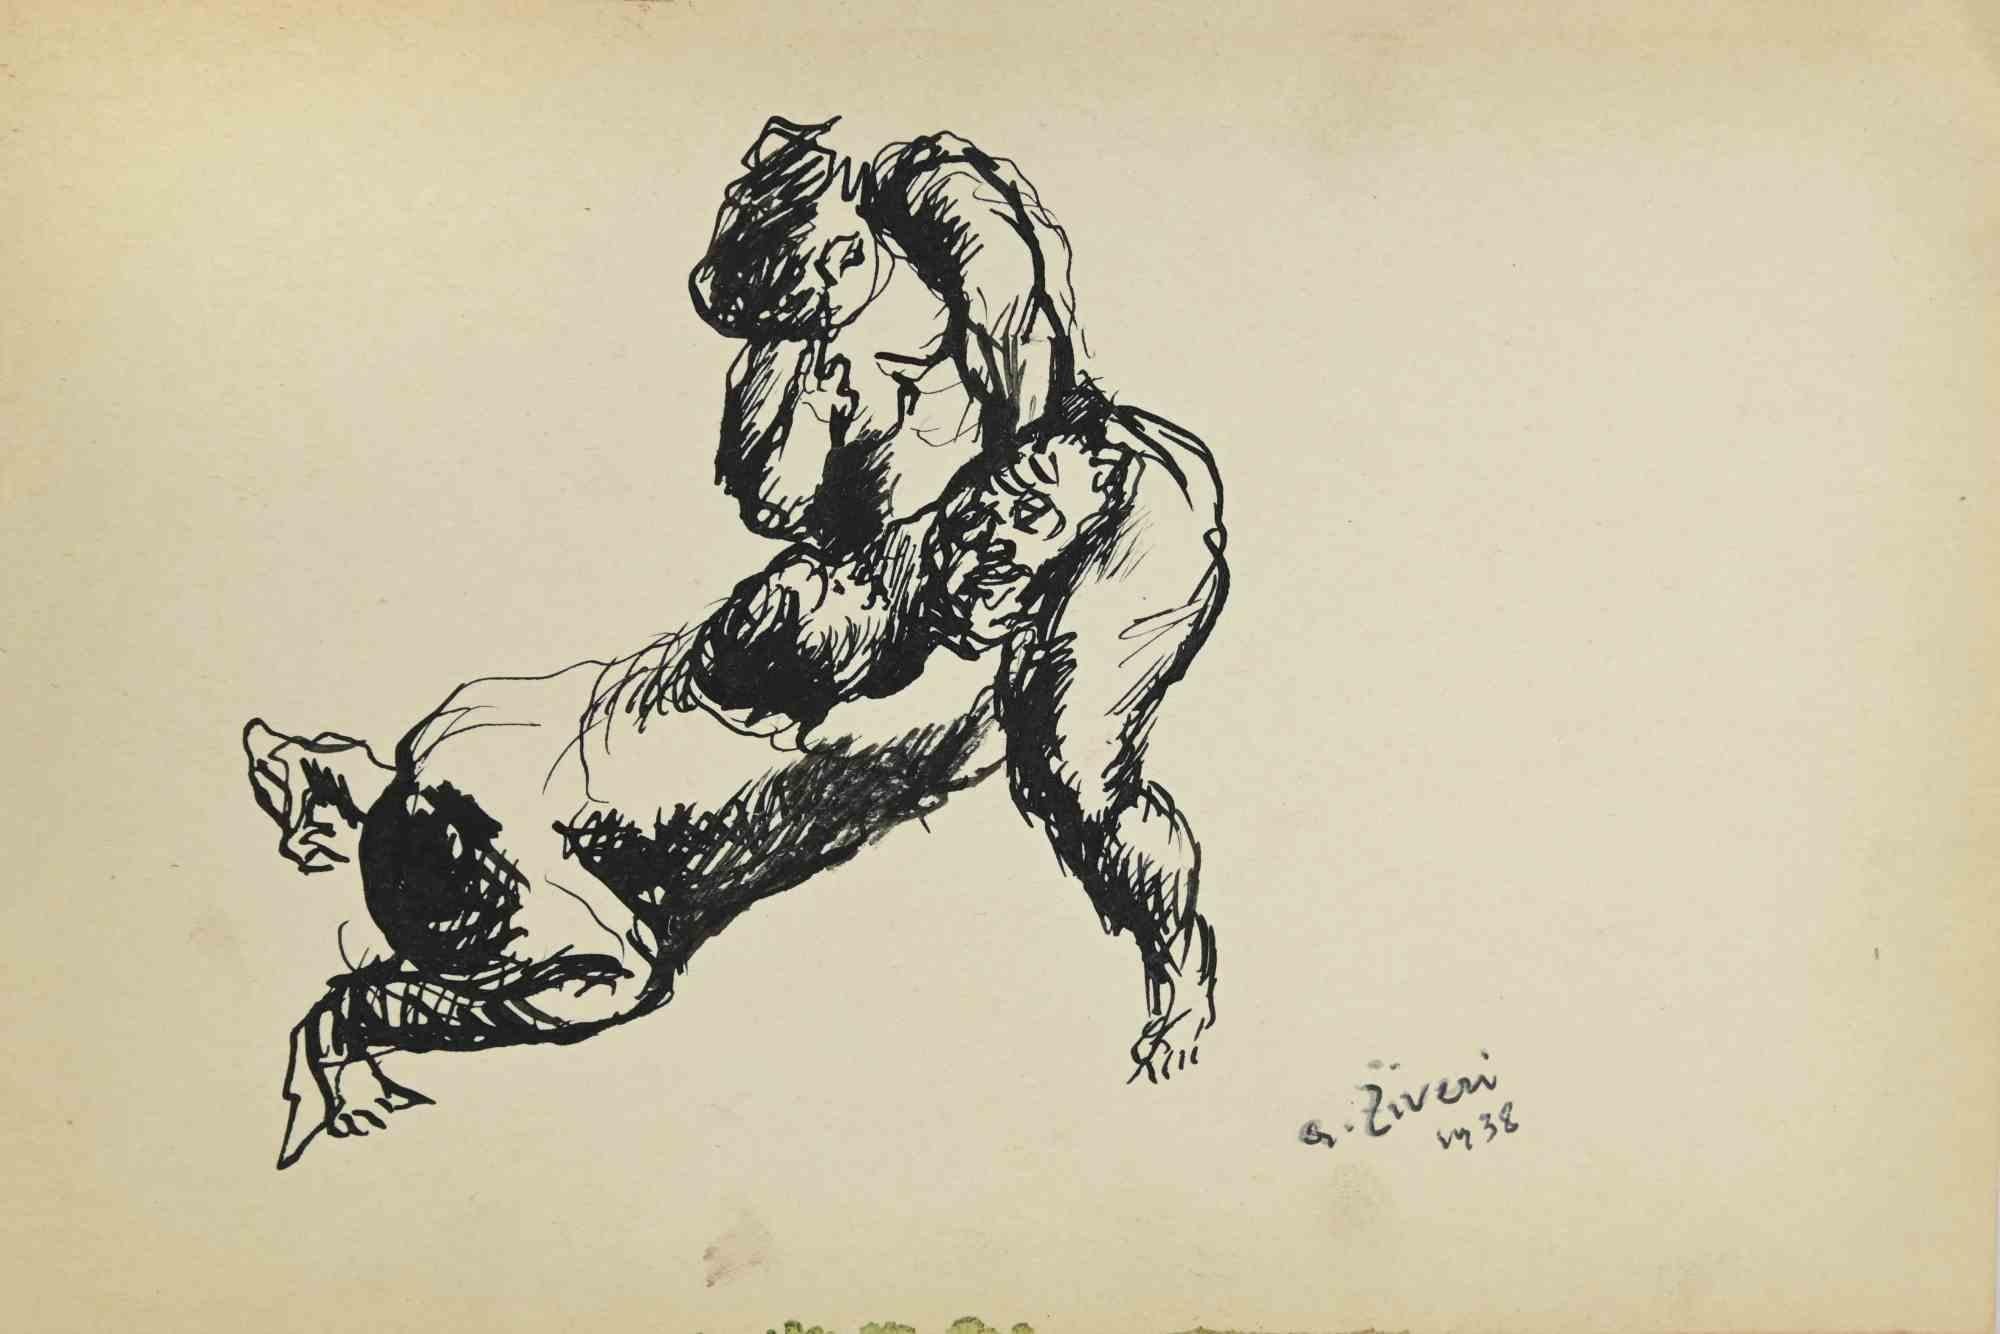 Erotic Scene is a drawing realized by Alberto Ziveri in 1938.

Ink on paper.

Hand-signed and dated.

In good conditions with slight foxing.

The artwork is represented through deft strokes masterly.

Alberto Ziveri (Rome,1908 – 1990), the Italian